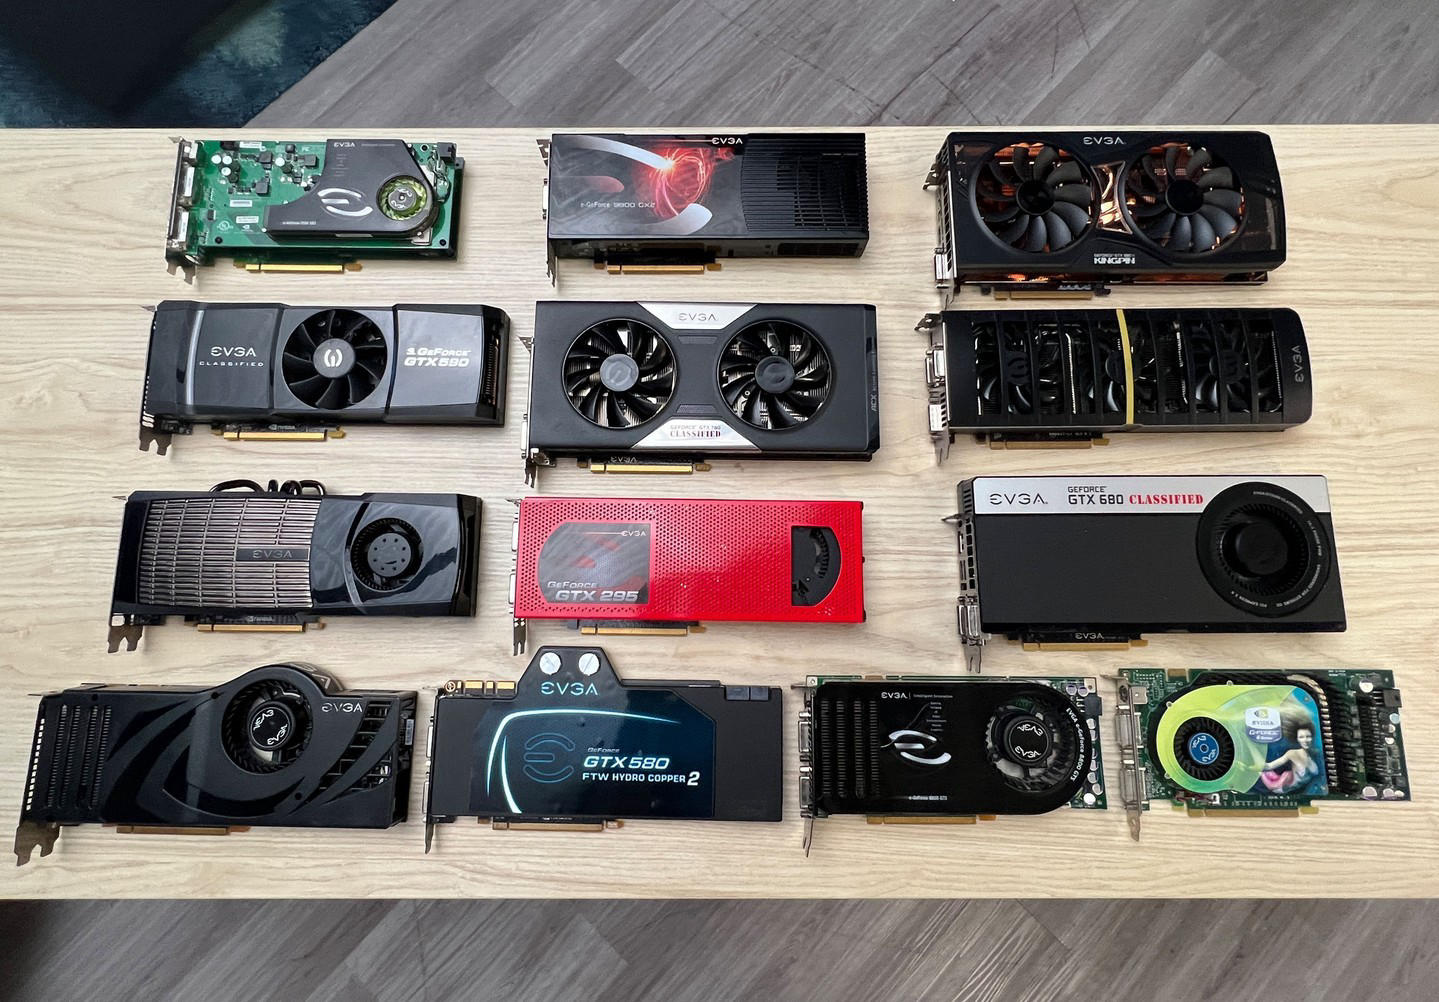 Linus Tech Tips - some beautiful EVGA cards from 2004-2015